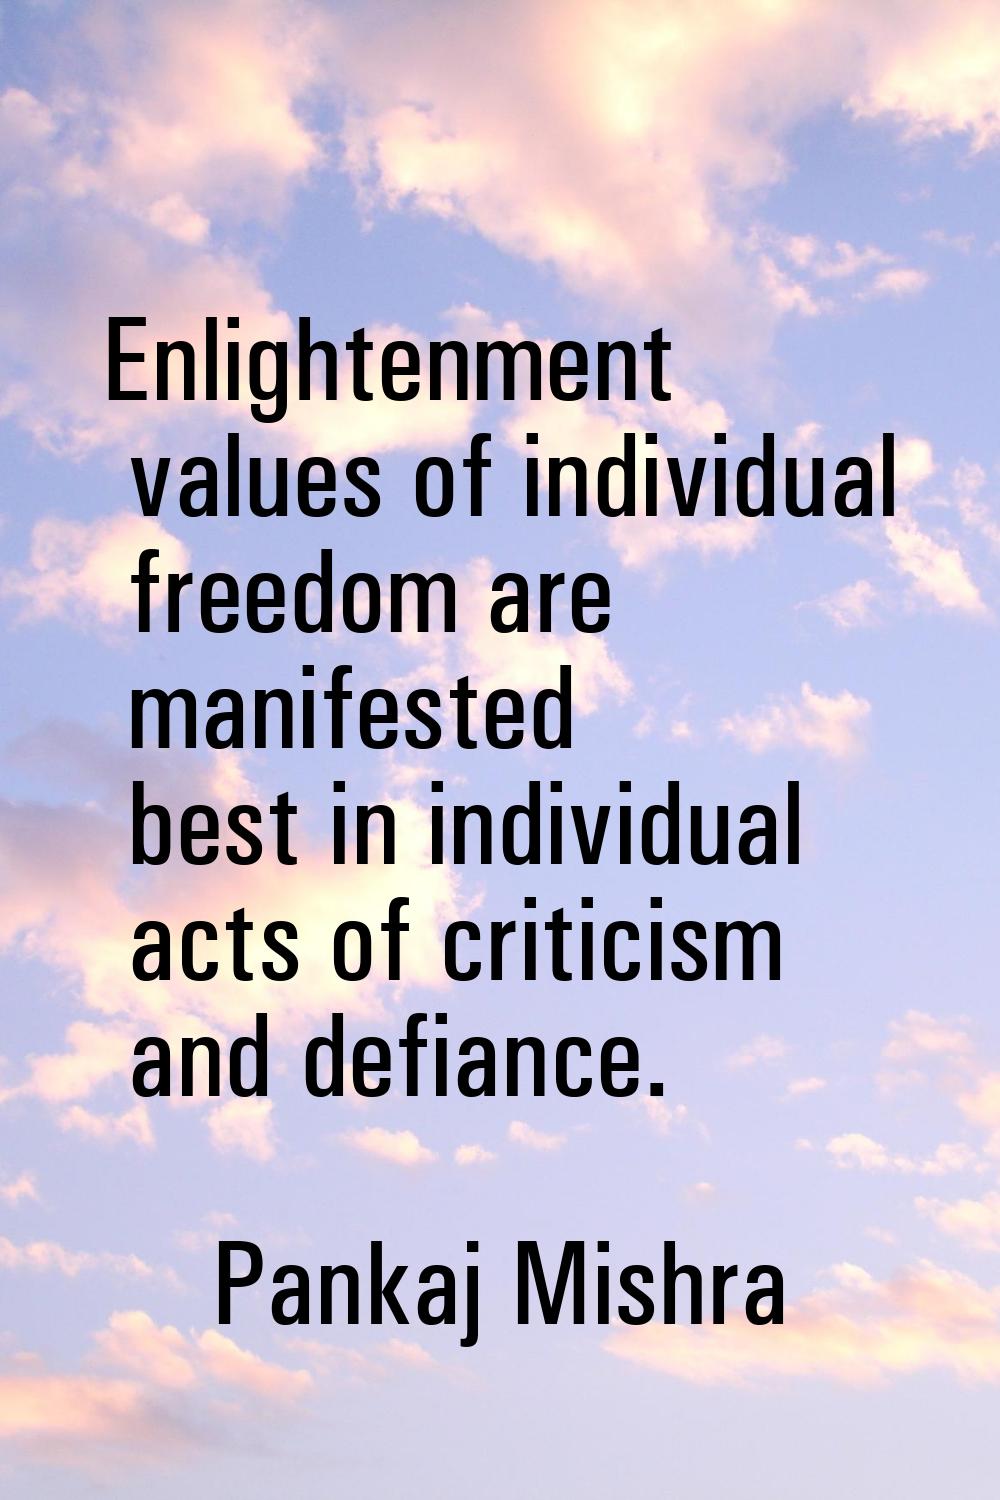 Enlightenment values of individual freedom are manifested best in individual acts of criticism and 